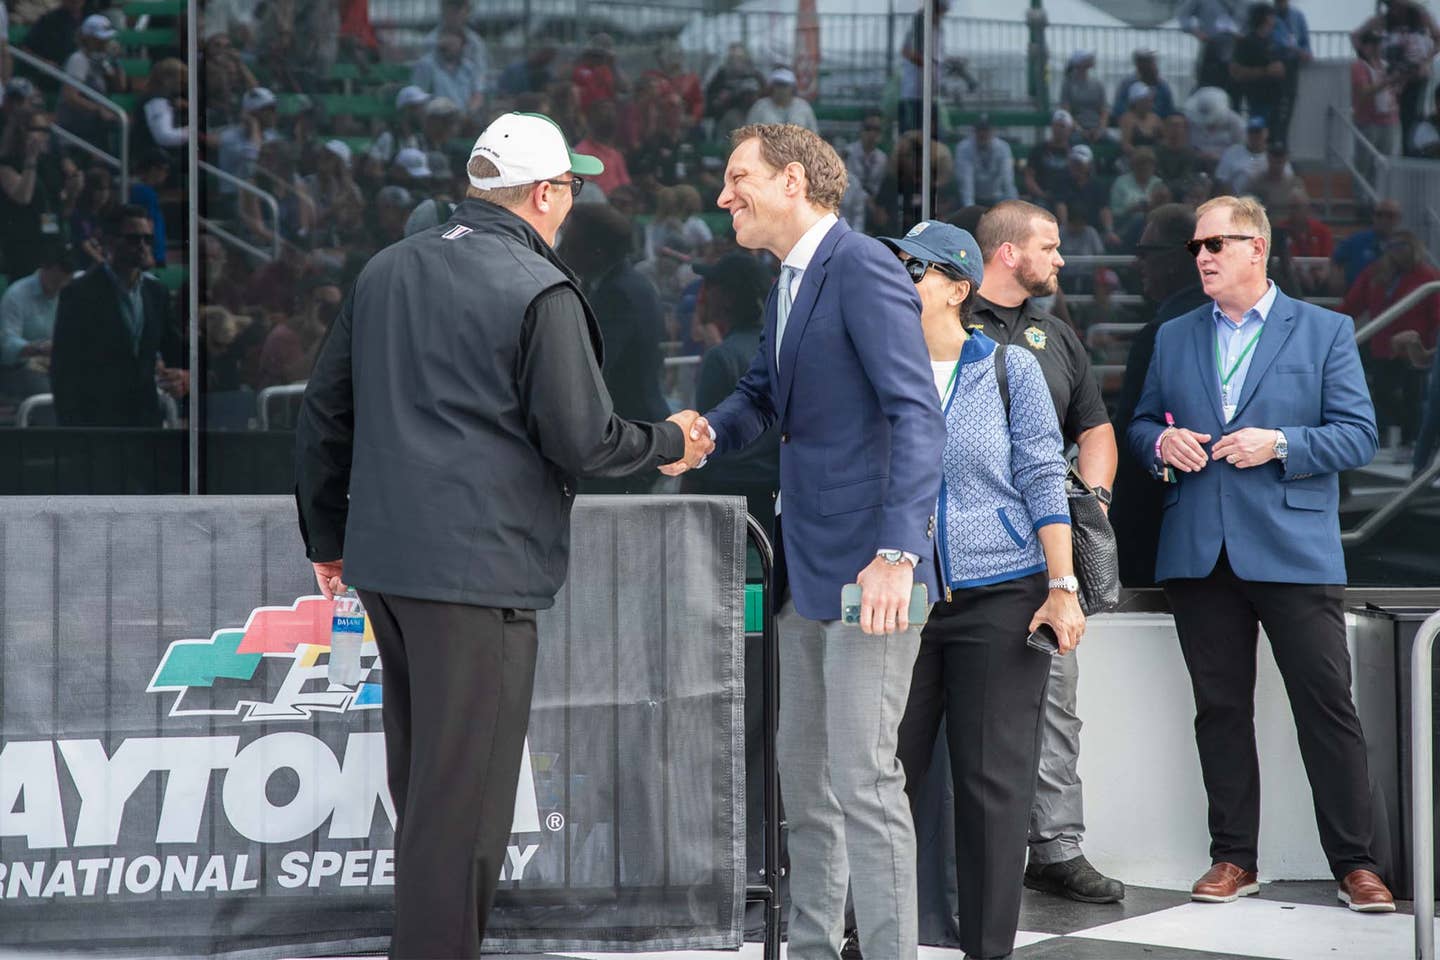 IMSA President John Doonan (left) shakes hands with Rolex USA President and CEO Luca Bernasconi (right) in victory lane at the 2023 Rolex 24.